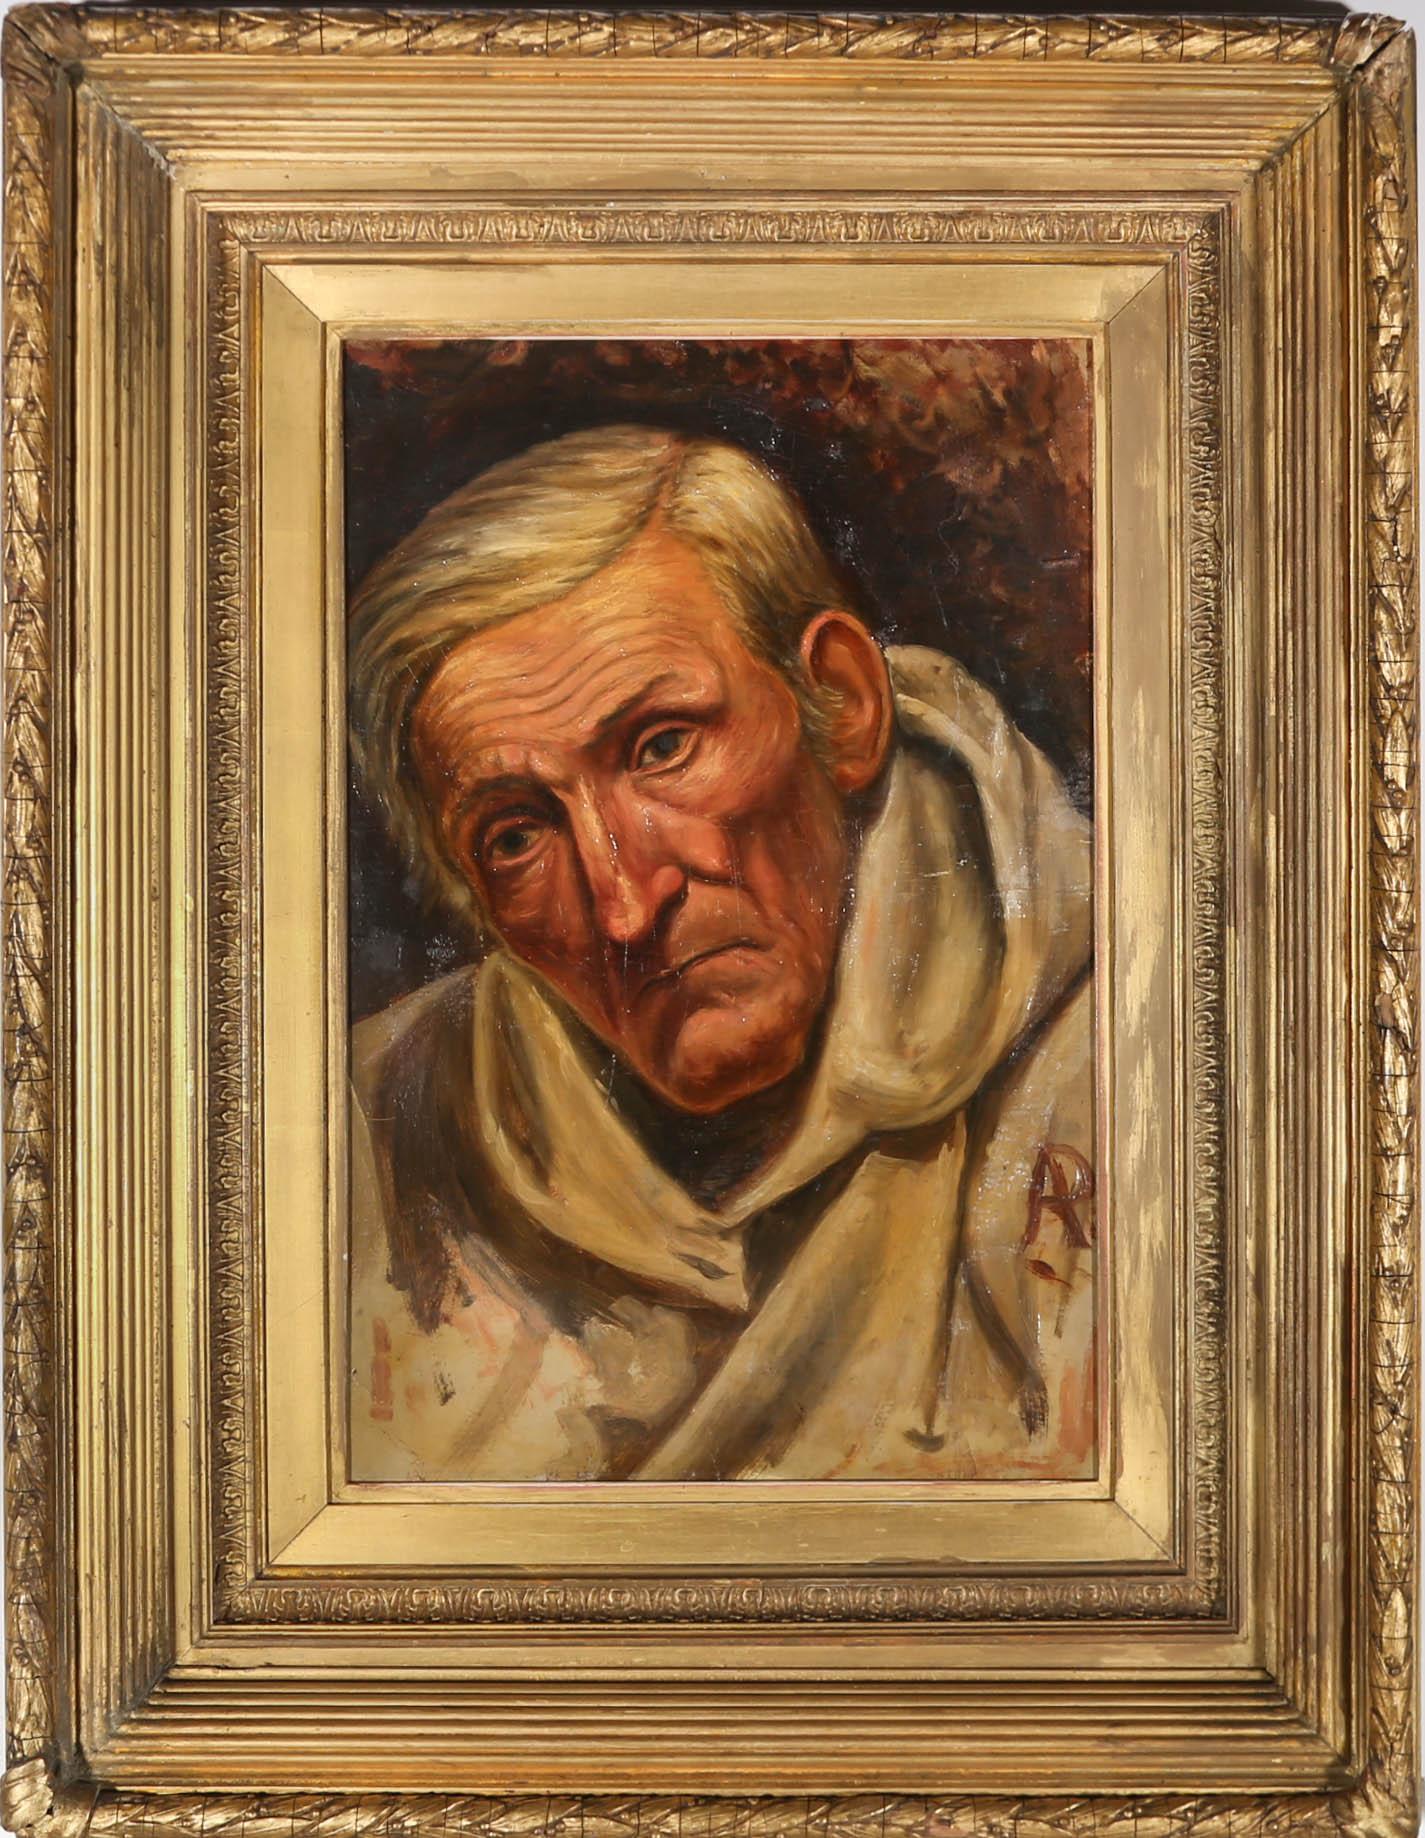 A striking 19th Century oil portrait of a distinctive and stern looking monk in a white robe. The artist has monogrammed to the right edge and the painting has been handsomely presented in a 19th Century gilt frame with laurel and berry molding,